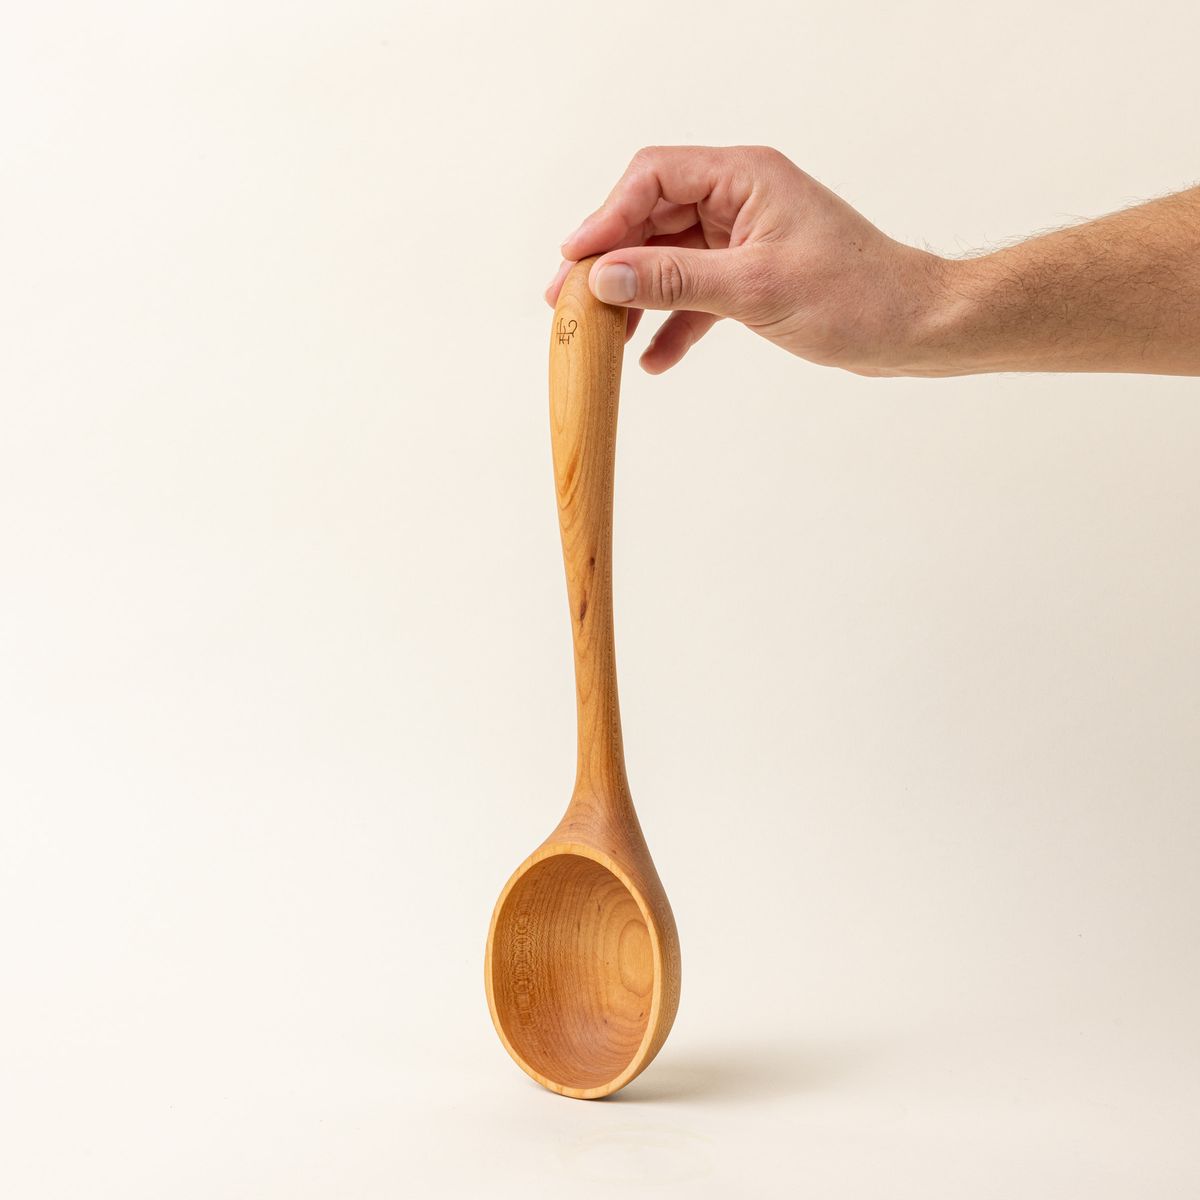 A hand holds a wooden ladle with a large scoop